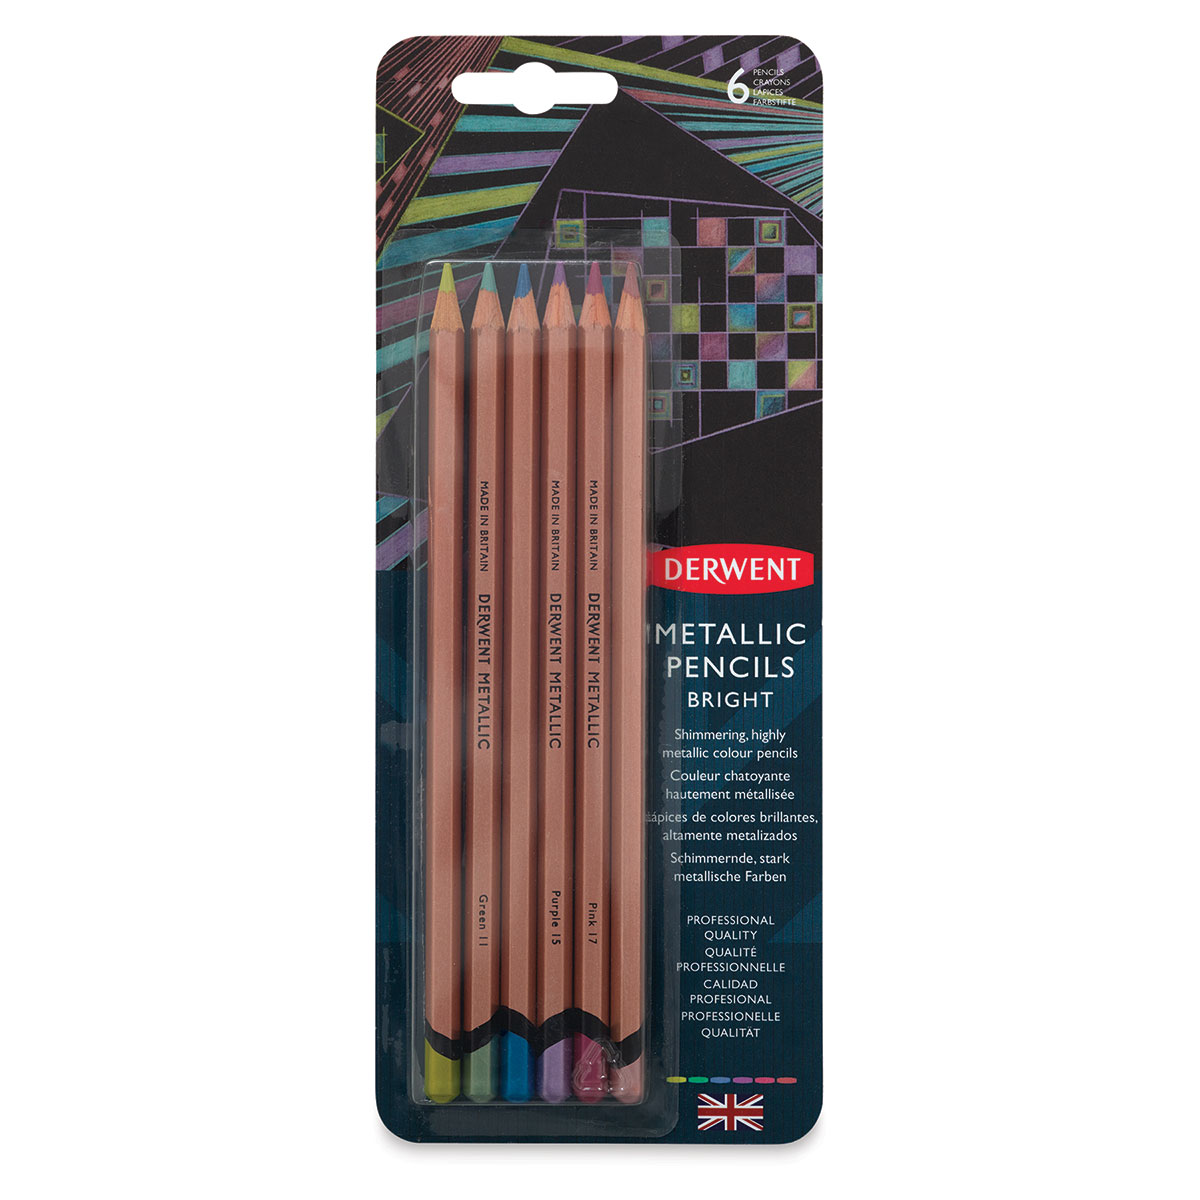 Best Metallic Colored Pencils - Discussion and Top Picks